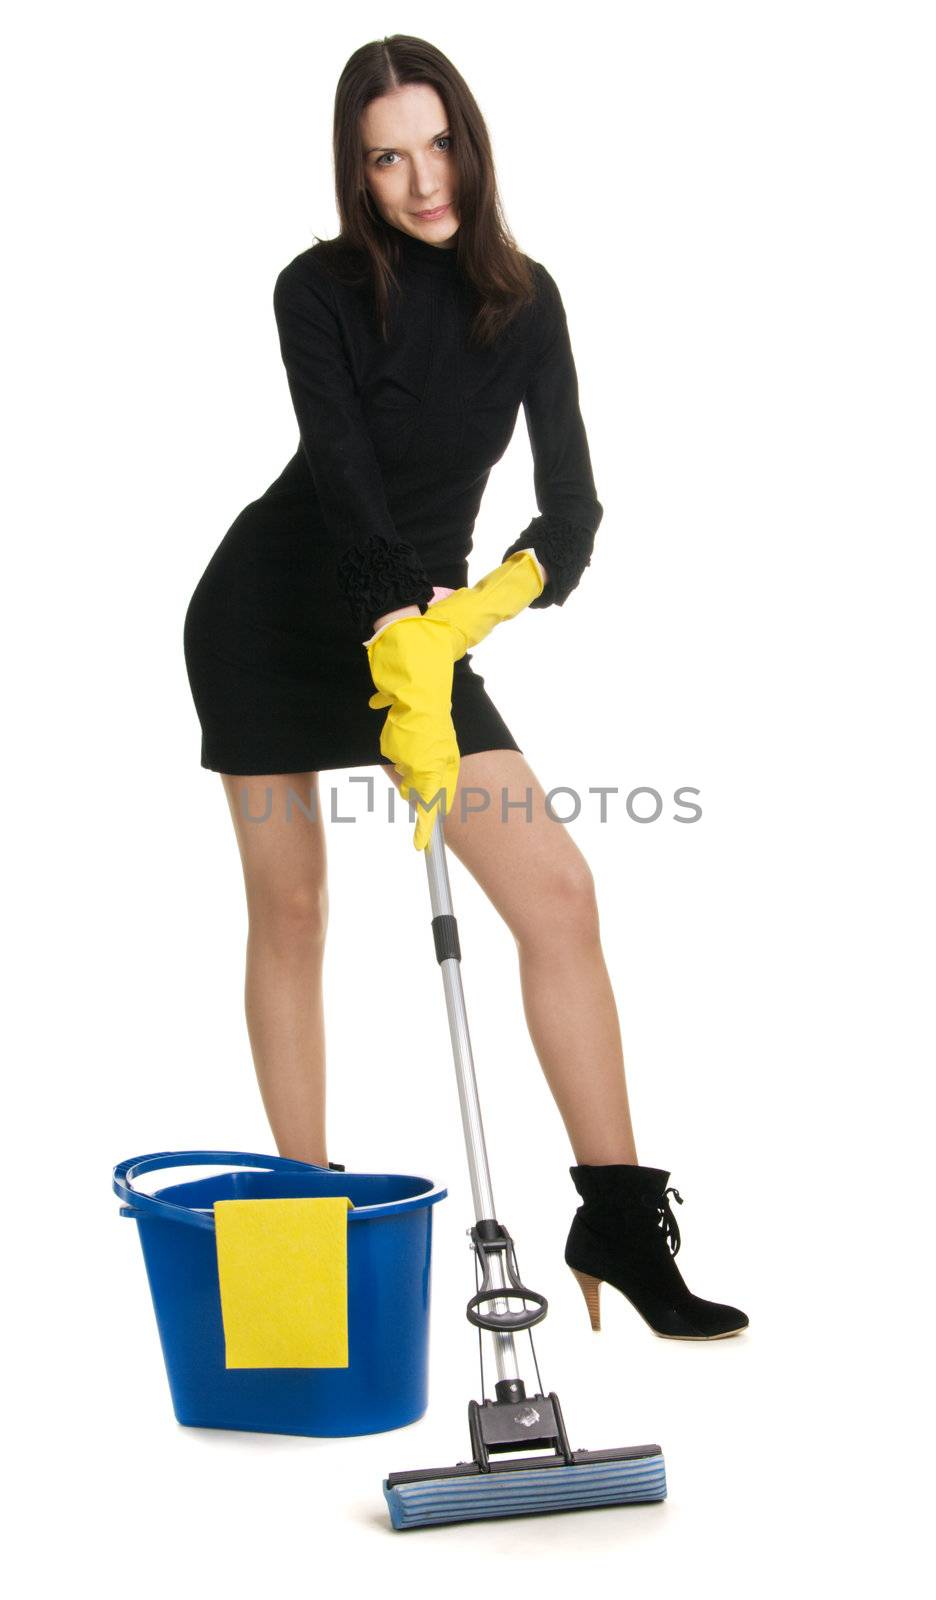 Sexy housewife in elegant dress holding a swab and bucket, white background